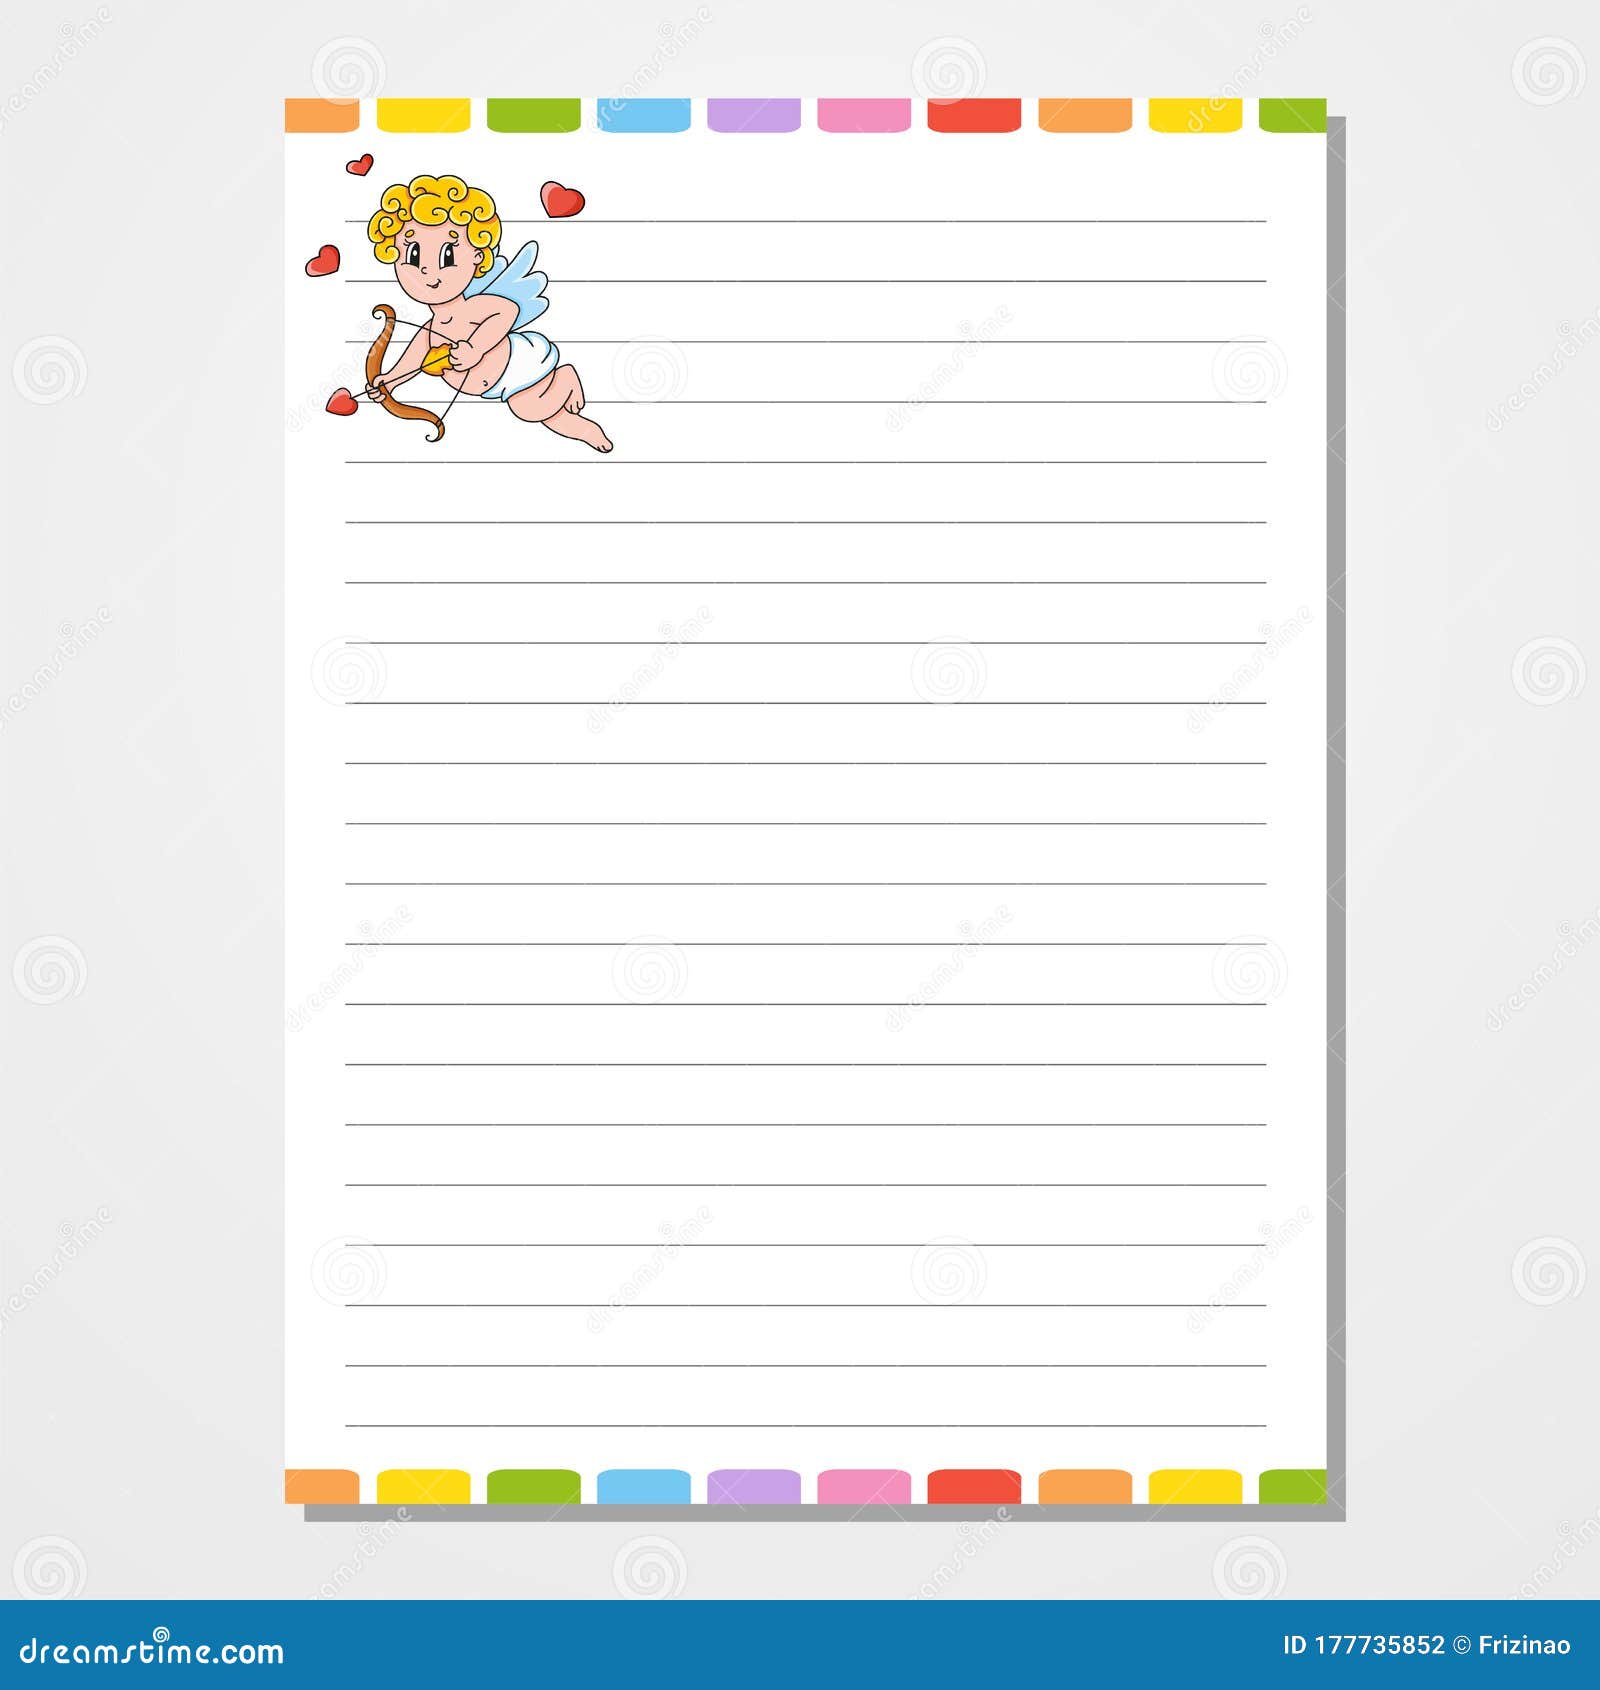 Diary Page Template from thumbs.dreamstime.com